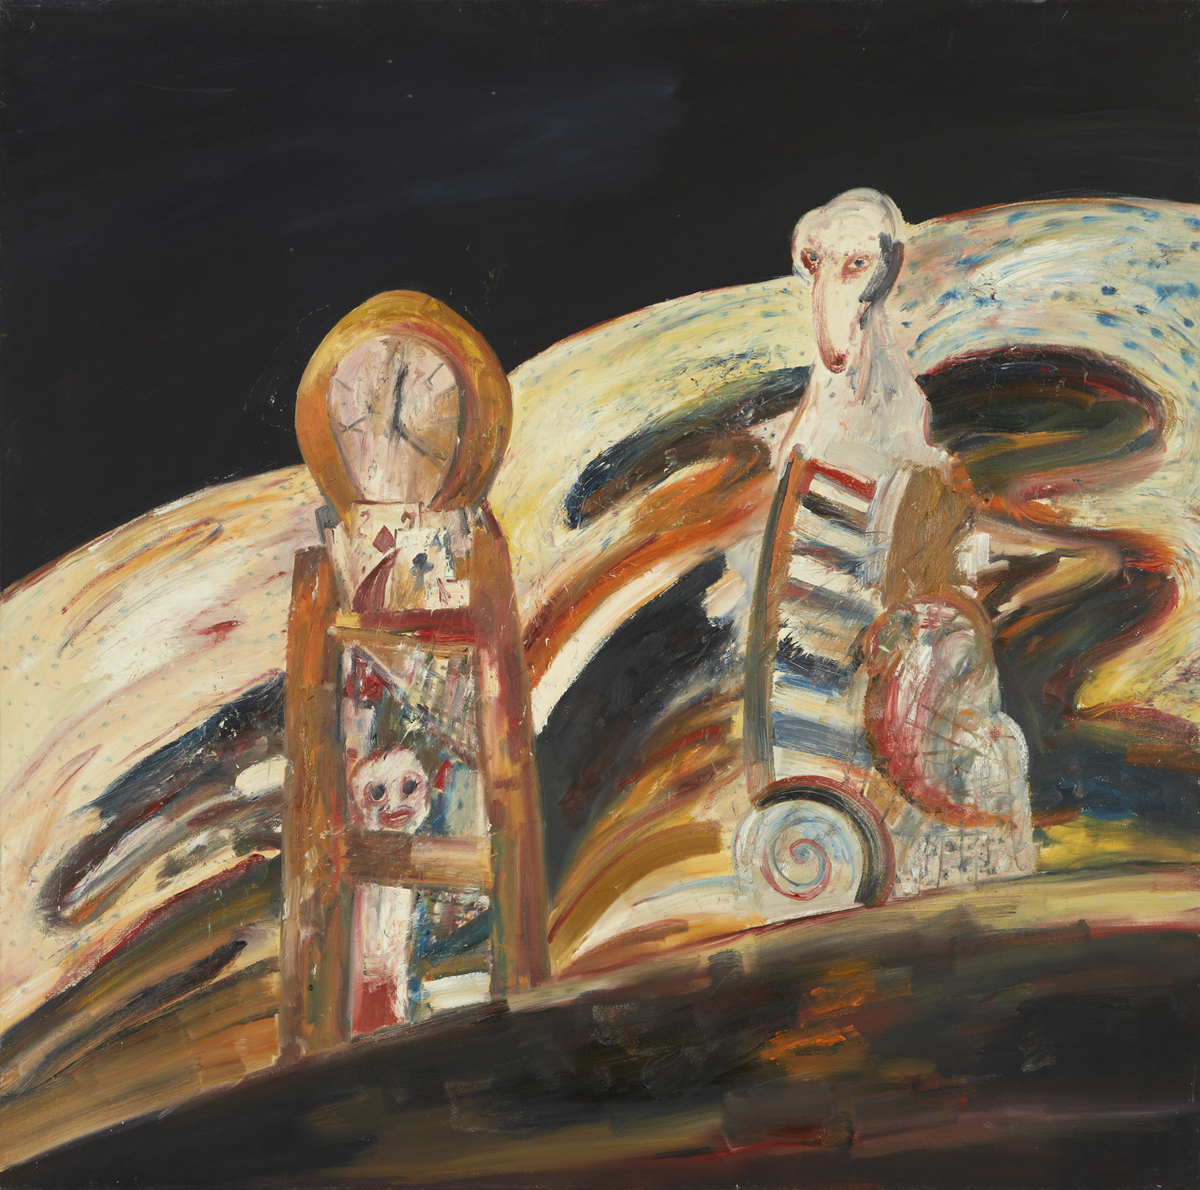 Time Will Tell (1975), Oil on Canvas, 68 x 68 inches